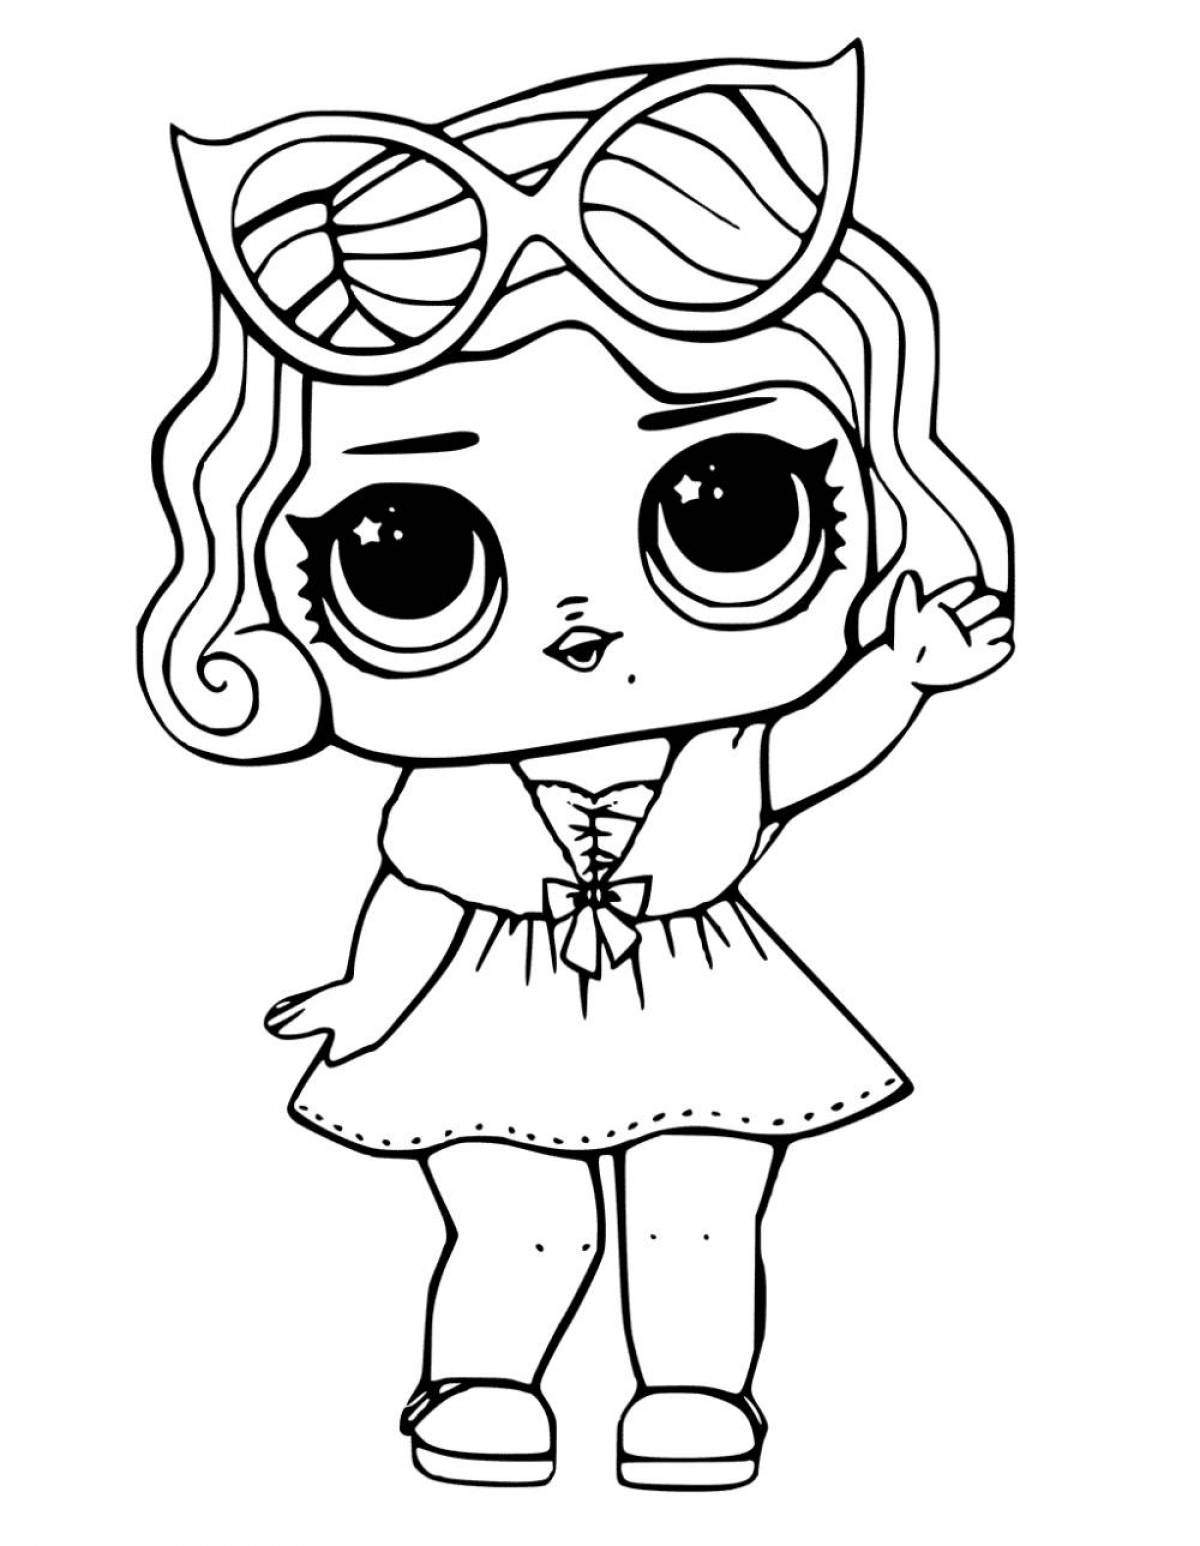 Adorable lola dolls coloring pages for kids